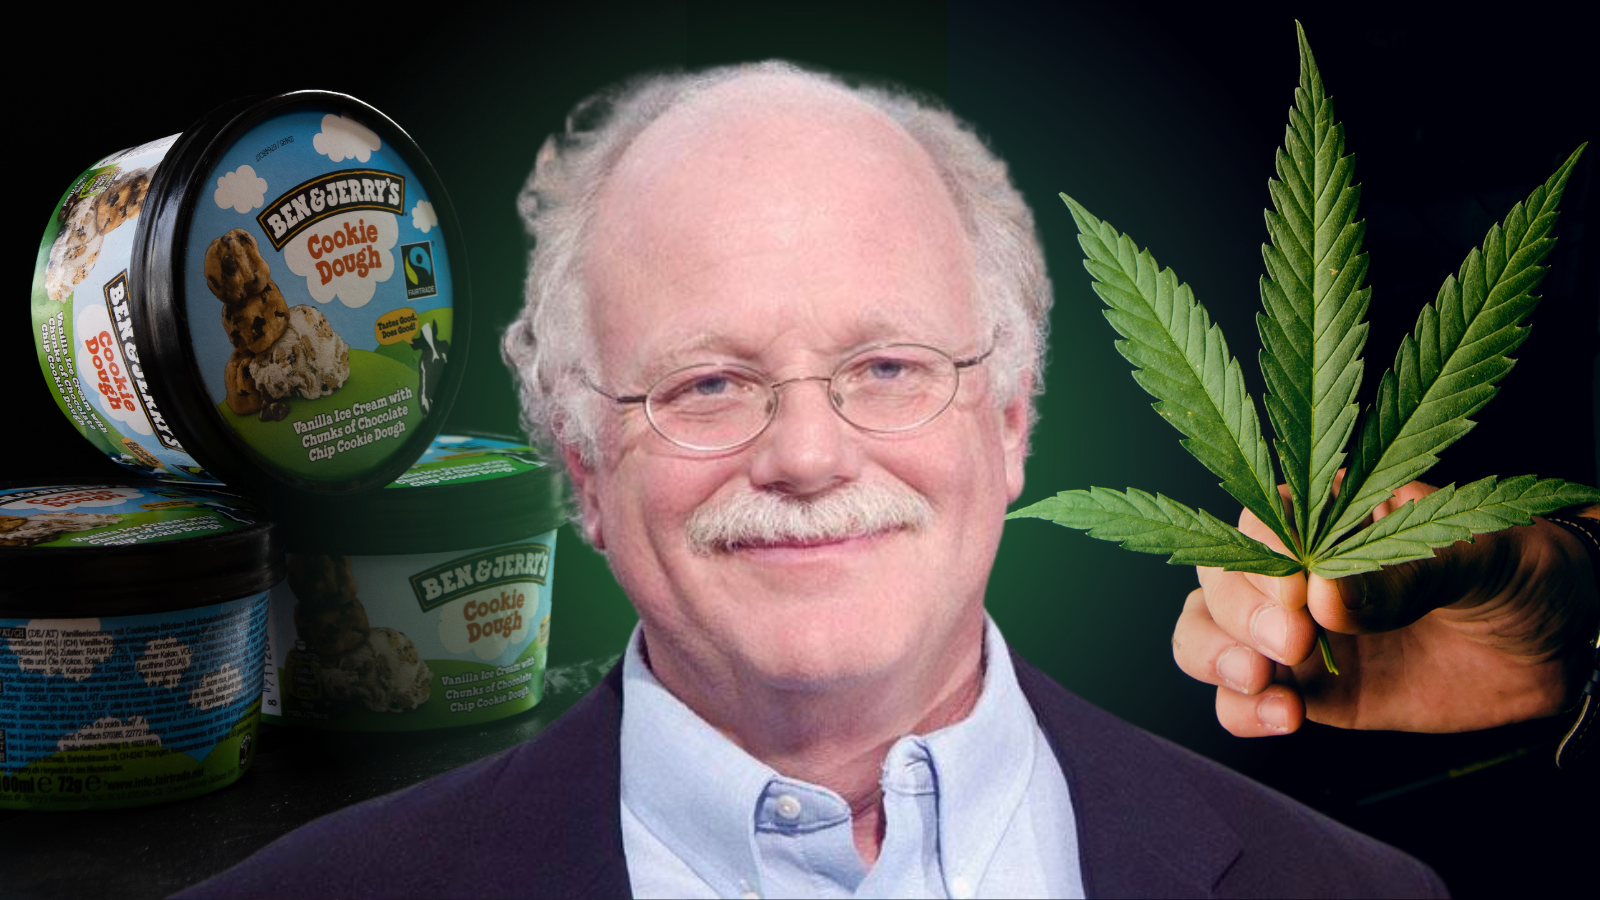 You Won’t Believe What Ben & Jerry’s Co-Founder is Doing Next – Cannabis Surprise